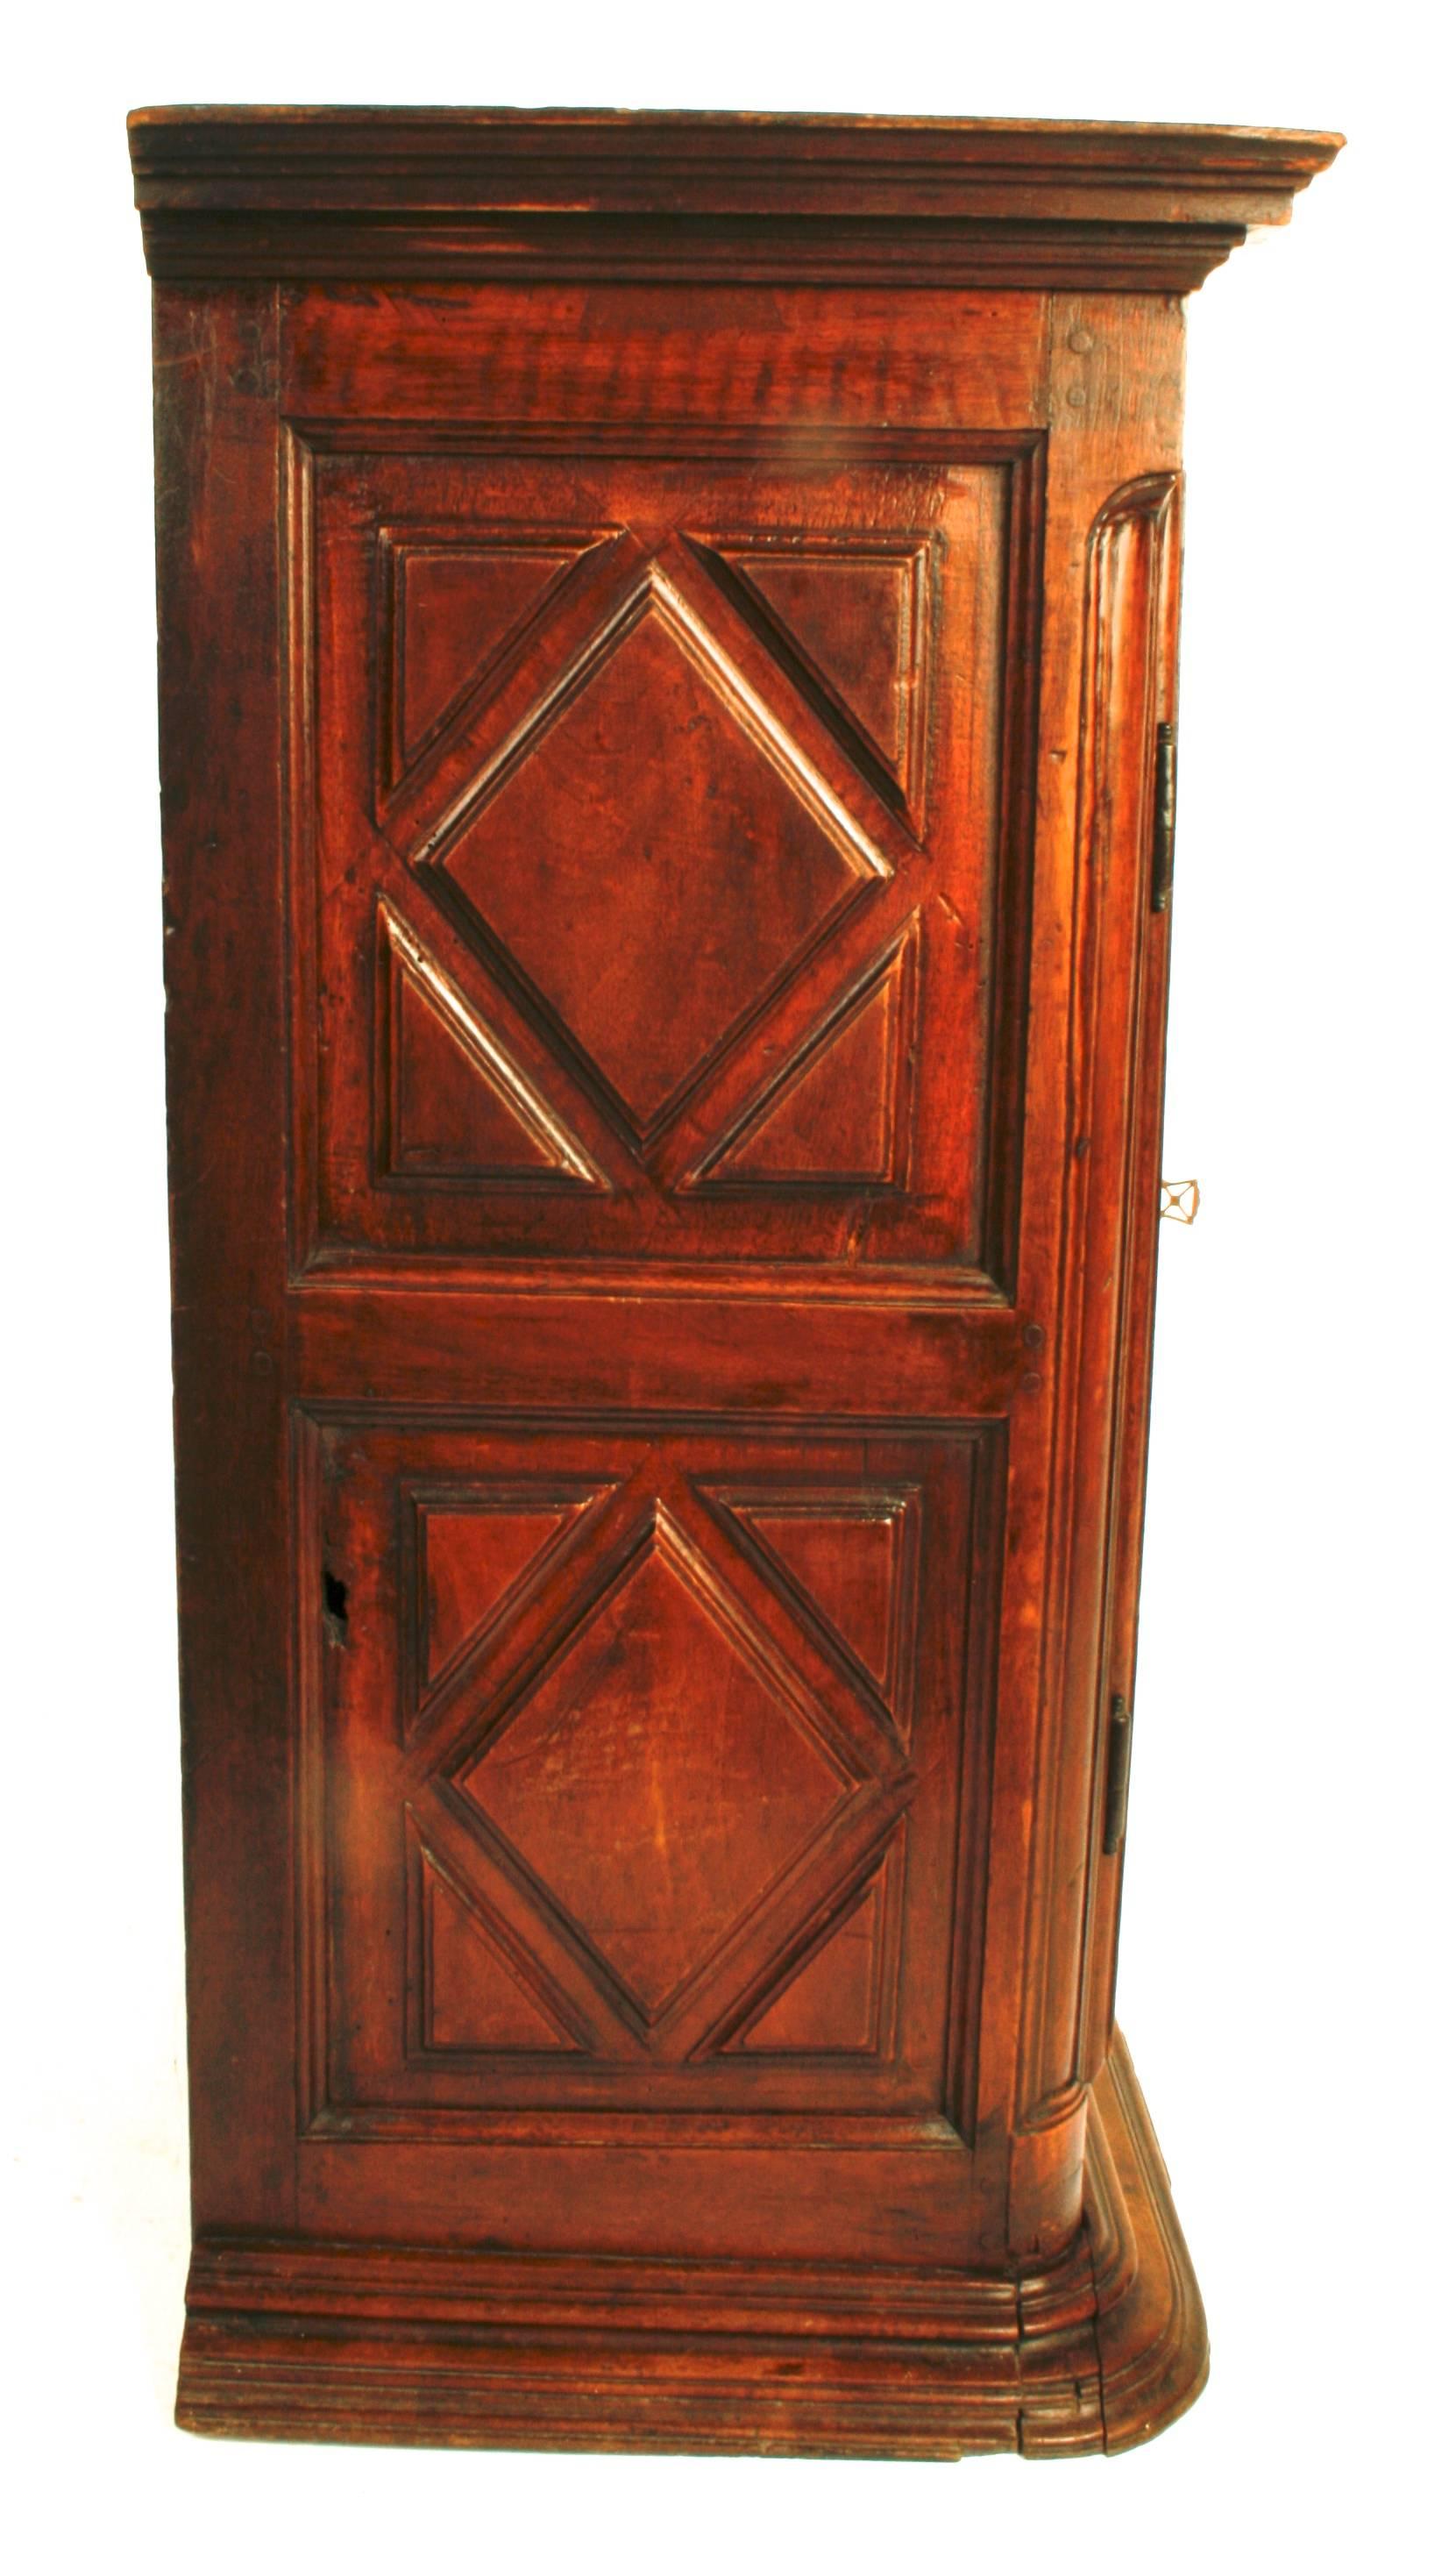 This handsome French wall cabinet is made of carved walnut. It has two carved doors with inlaid stars and original brass hardware with locking key. It has one interior shelf with a brass hook latch and two small drawers with brass knobs. The front